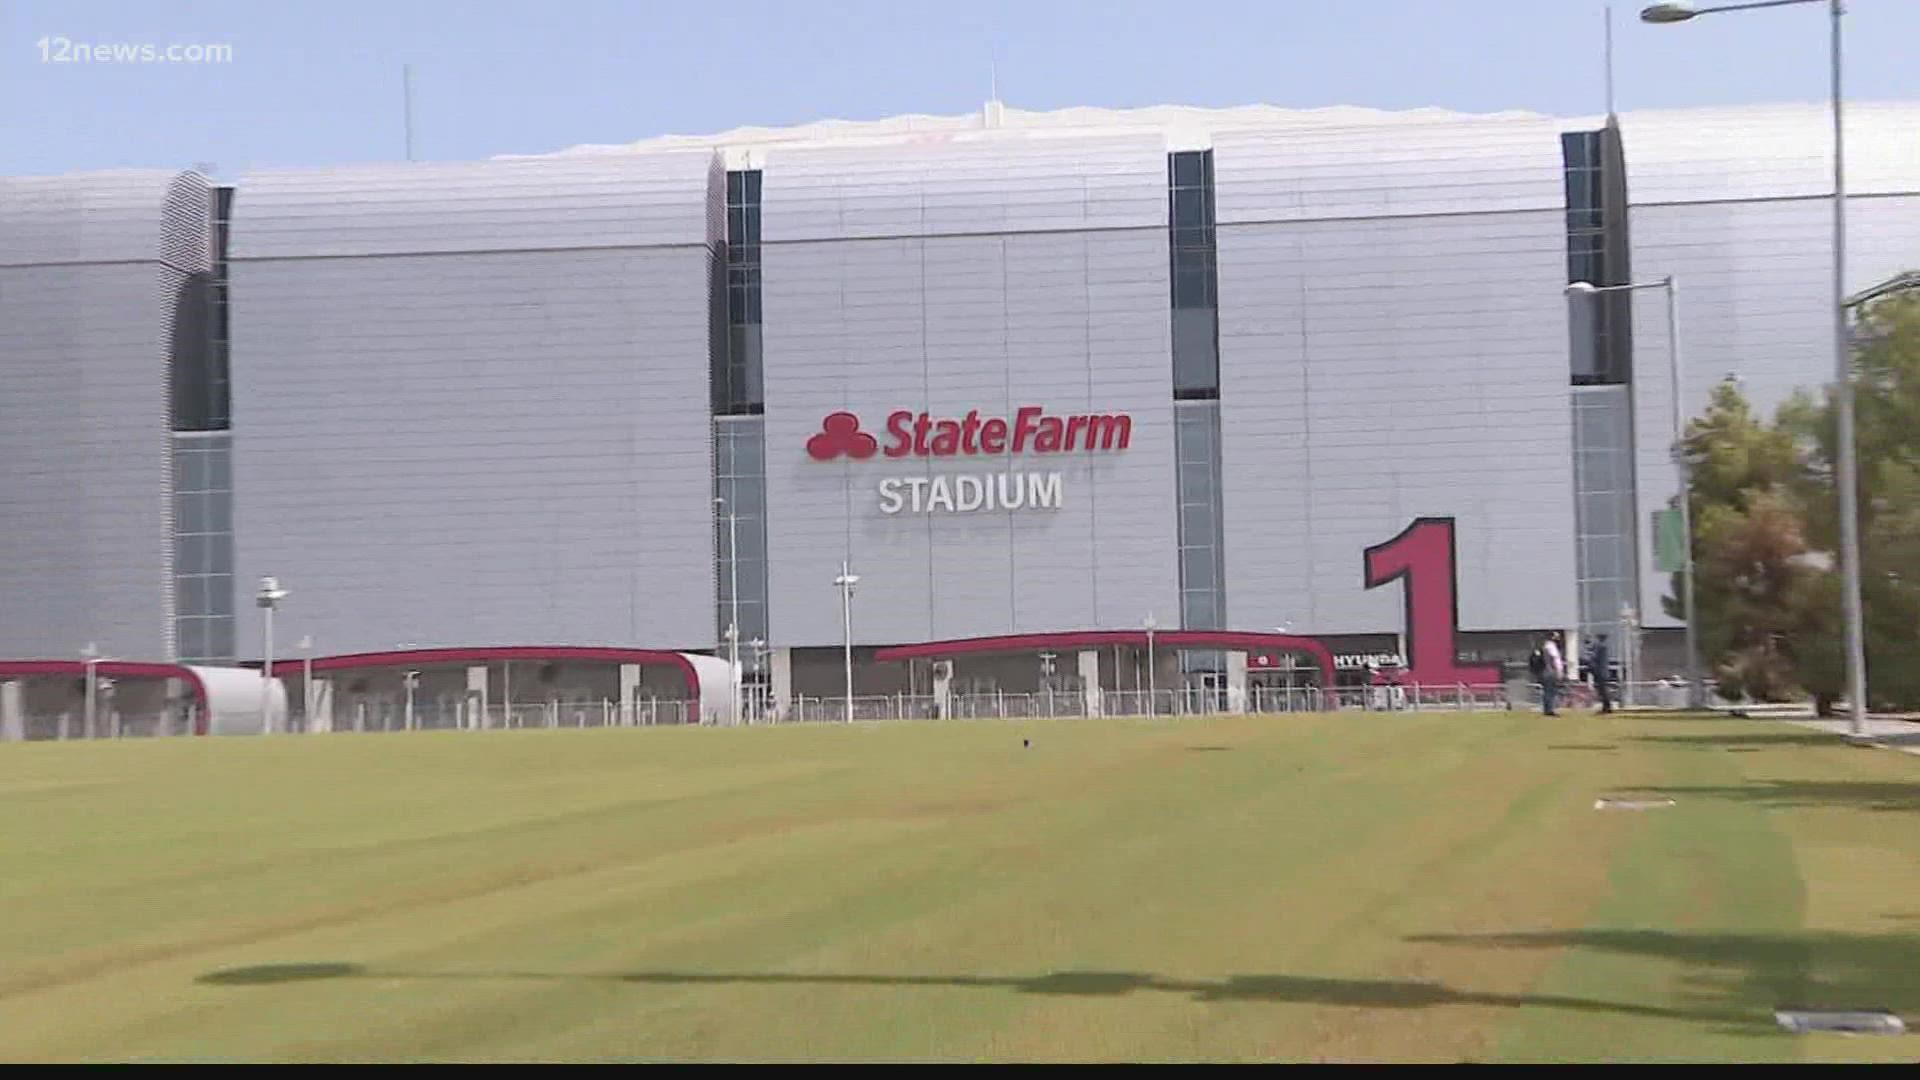 Here's what you need to know before you go to an Arizona Cardinals home game this year. Ryan Cody and Rachel McNeill have the details.